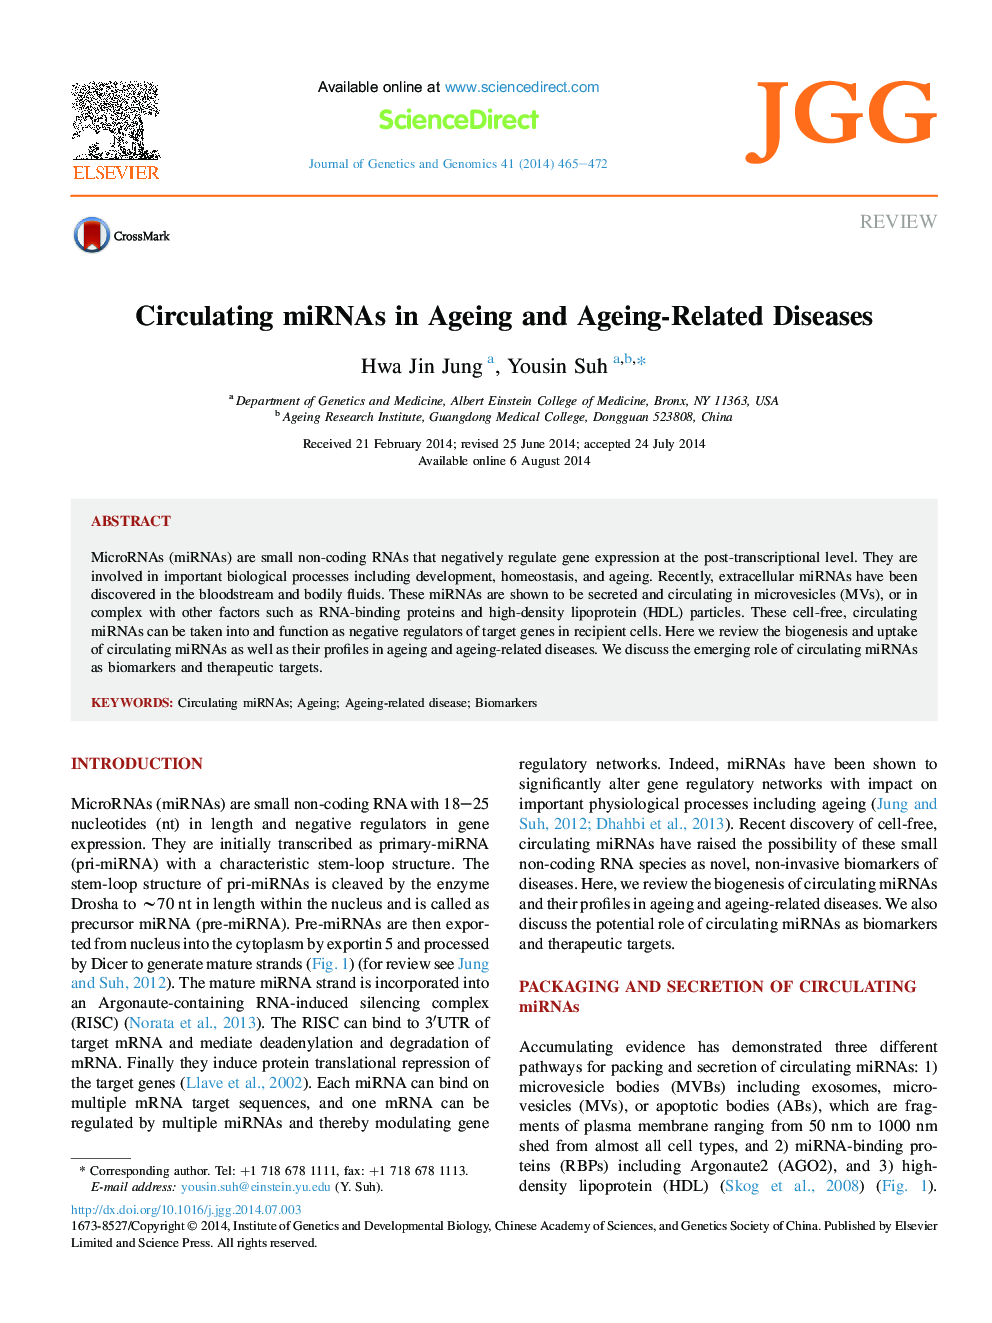 ReviewCirculating miRNAs in Ageing and Ageing-Related Diseases